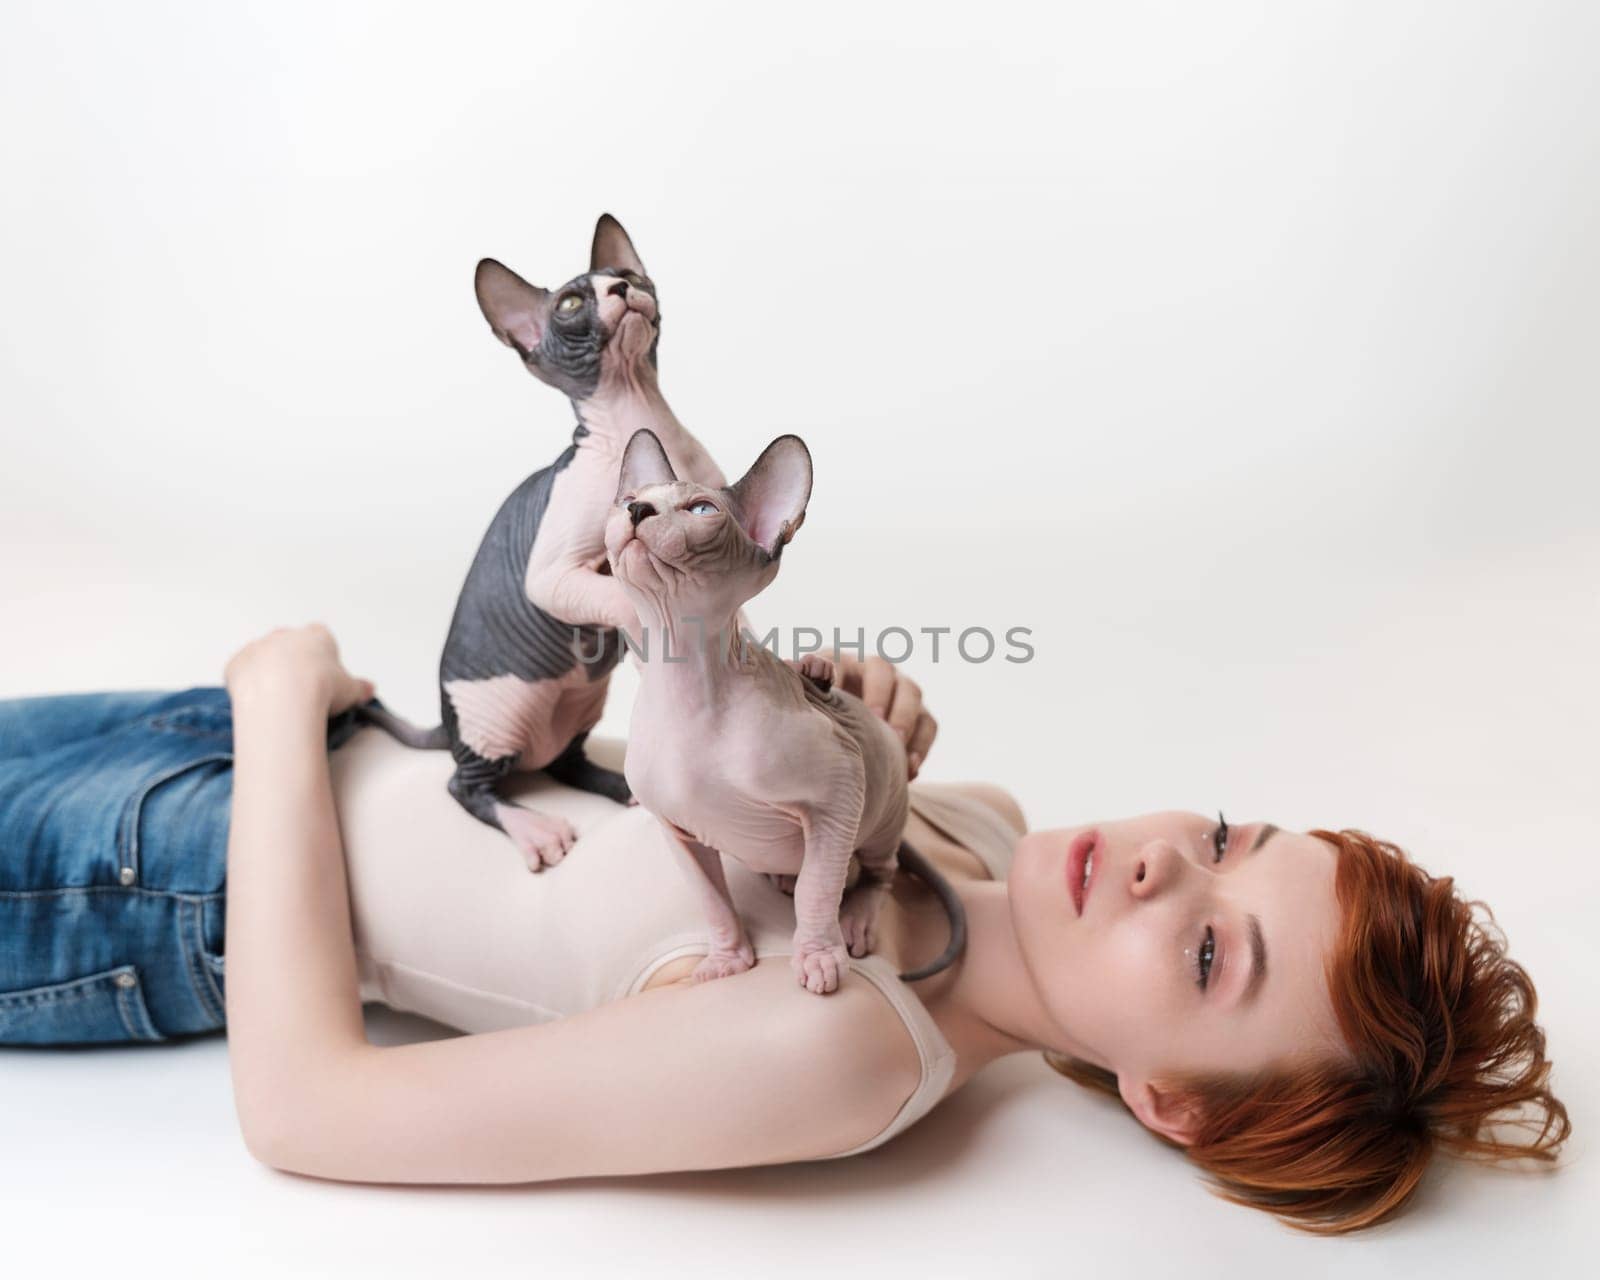 Two thoroughbred kittens looking up, sitting on redhead young woman lying on her back on white background. Pretty woman with short hair wearing T-shirt and blue jeans. Part of series. Selective focus